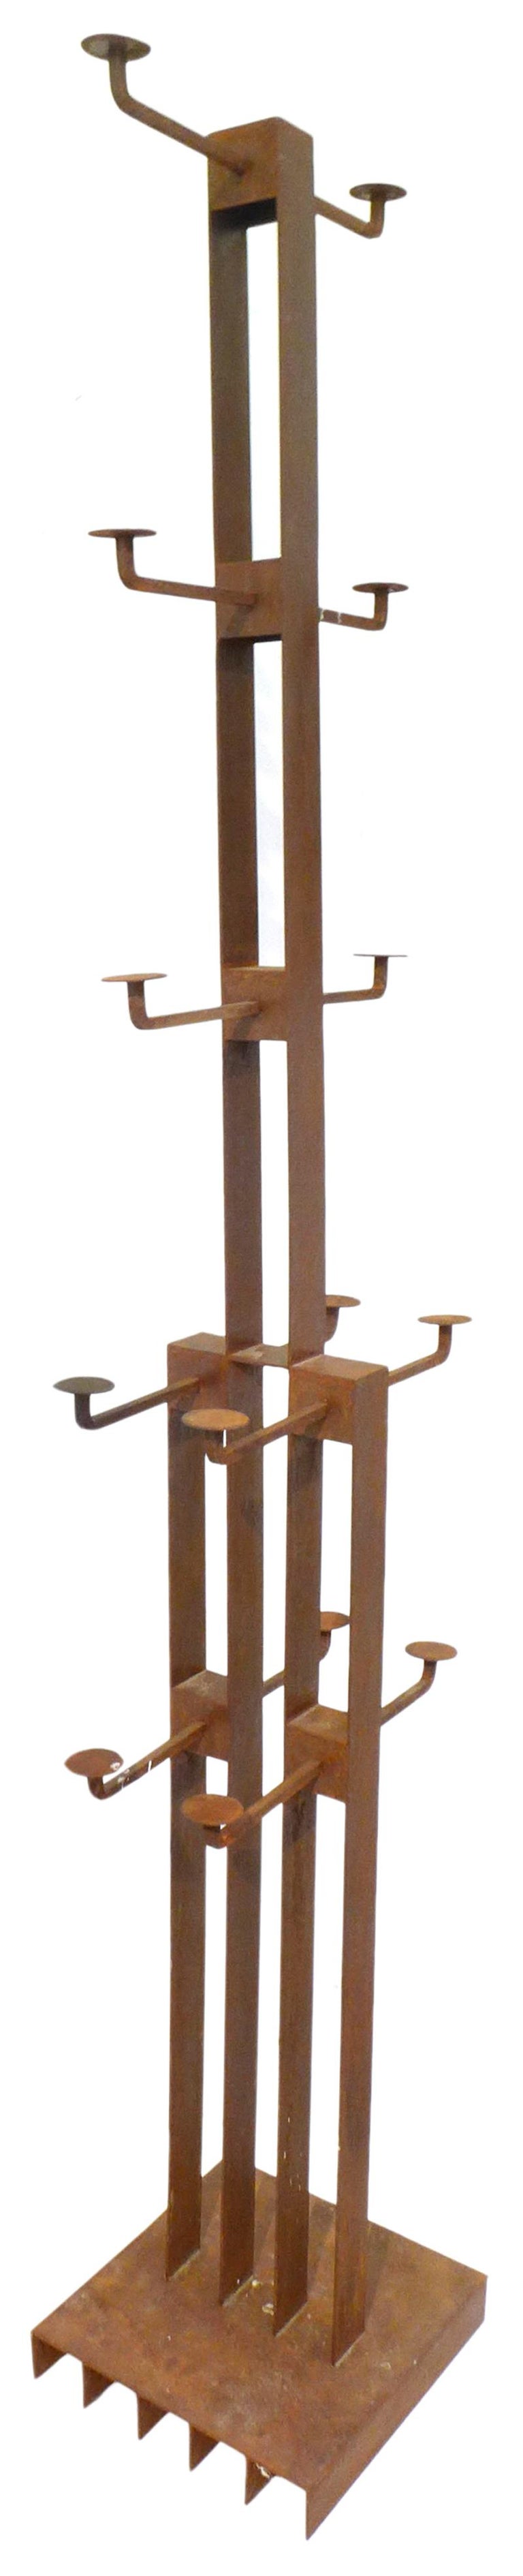 Architectural Modernist Welded Steel Coat or Hat Stand In Good Condition For Sale In Los Angeles, CA